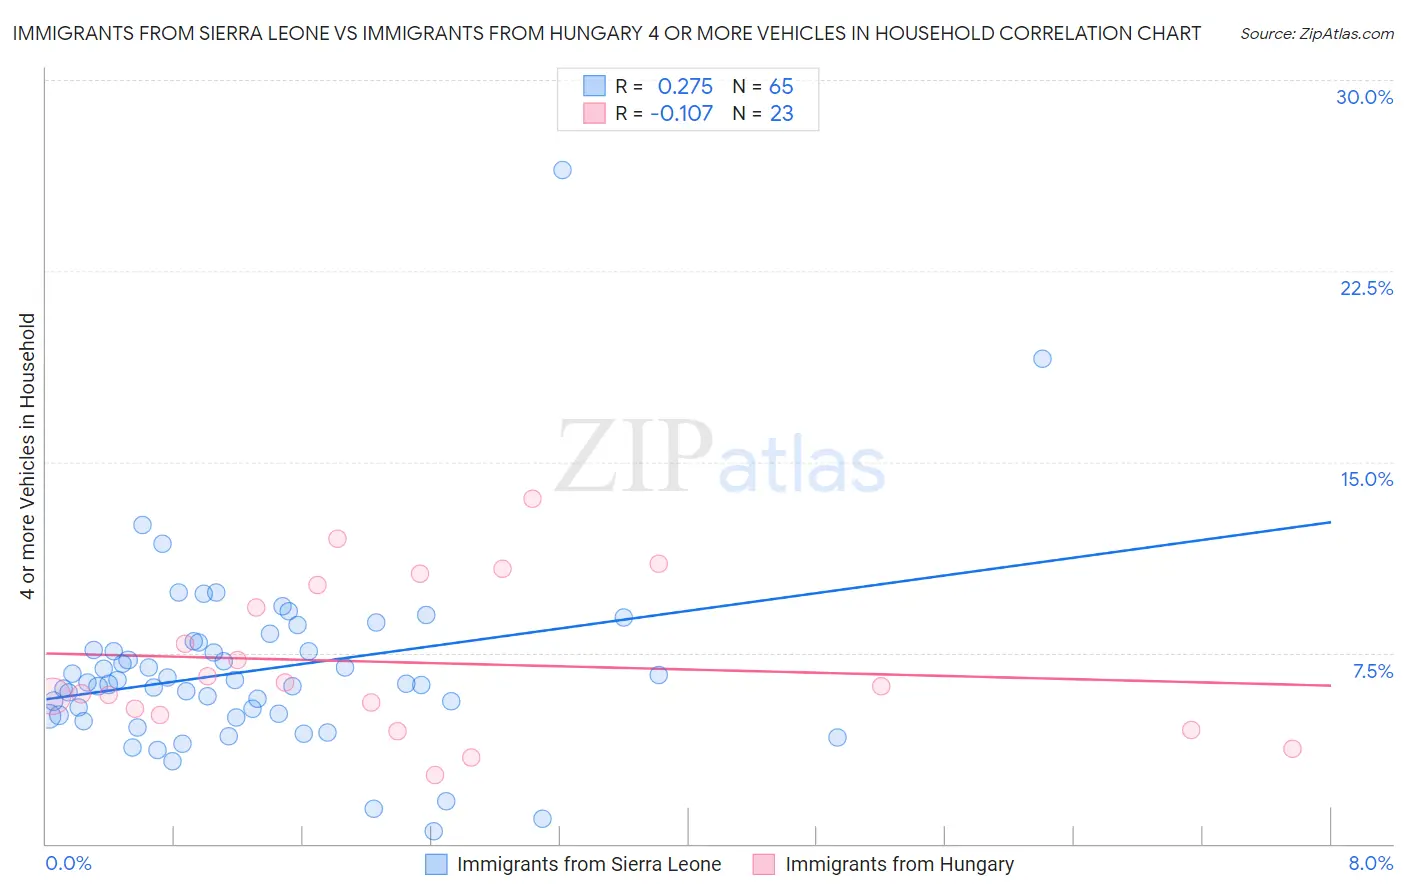 Immigrants from Sierra Leone vs Immigrants from Hungary 4 or more Vehicles in Household